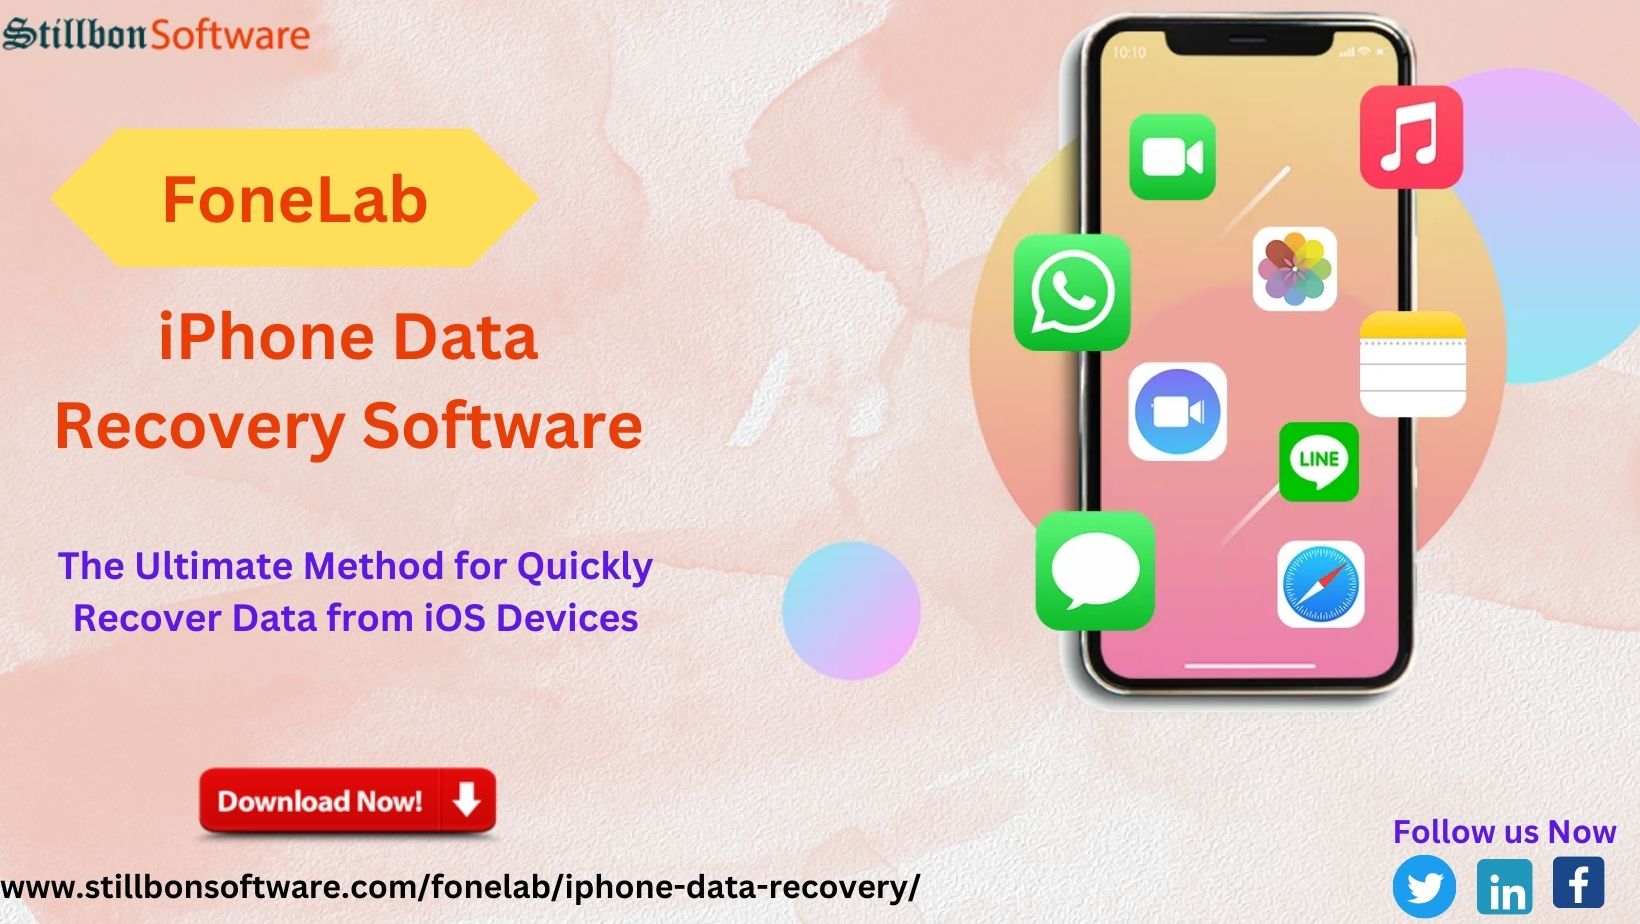 iPhone Data Recovery Software.jpg